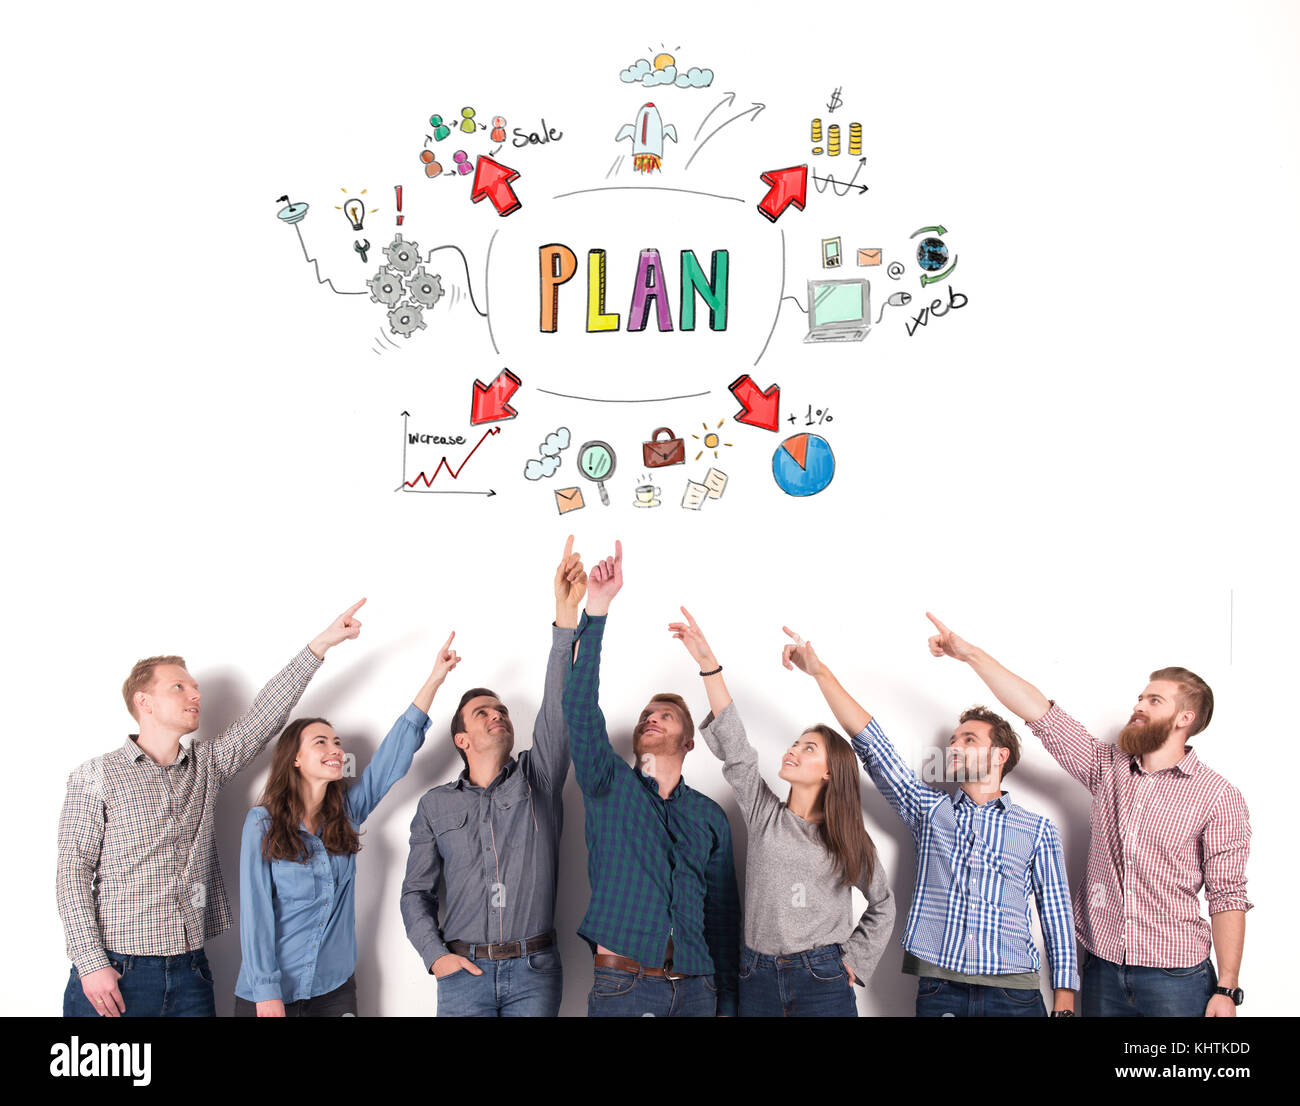 Business team indicate a business project. concept of creative idea and teamwork Stock Photo